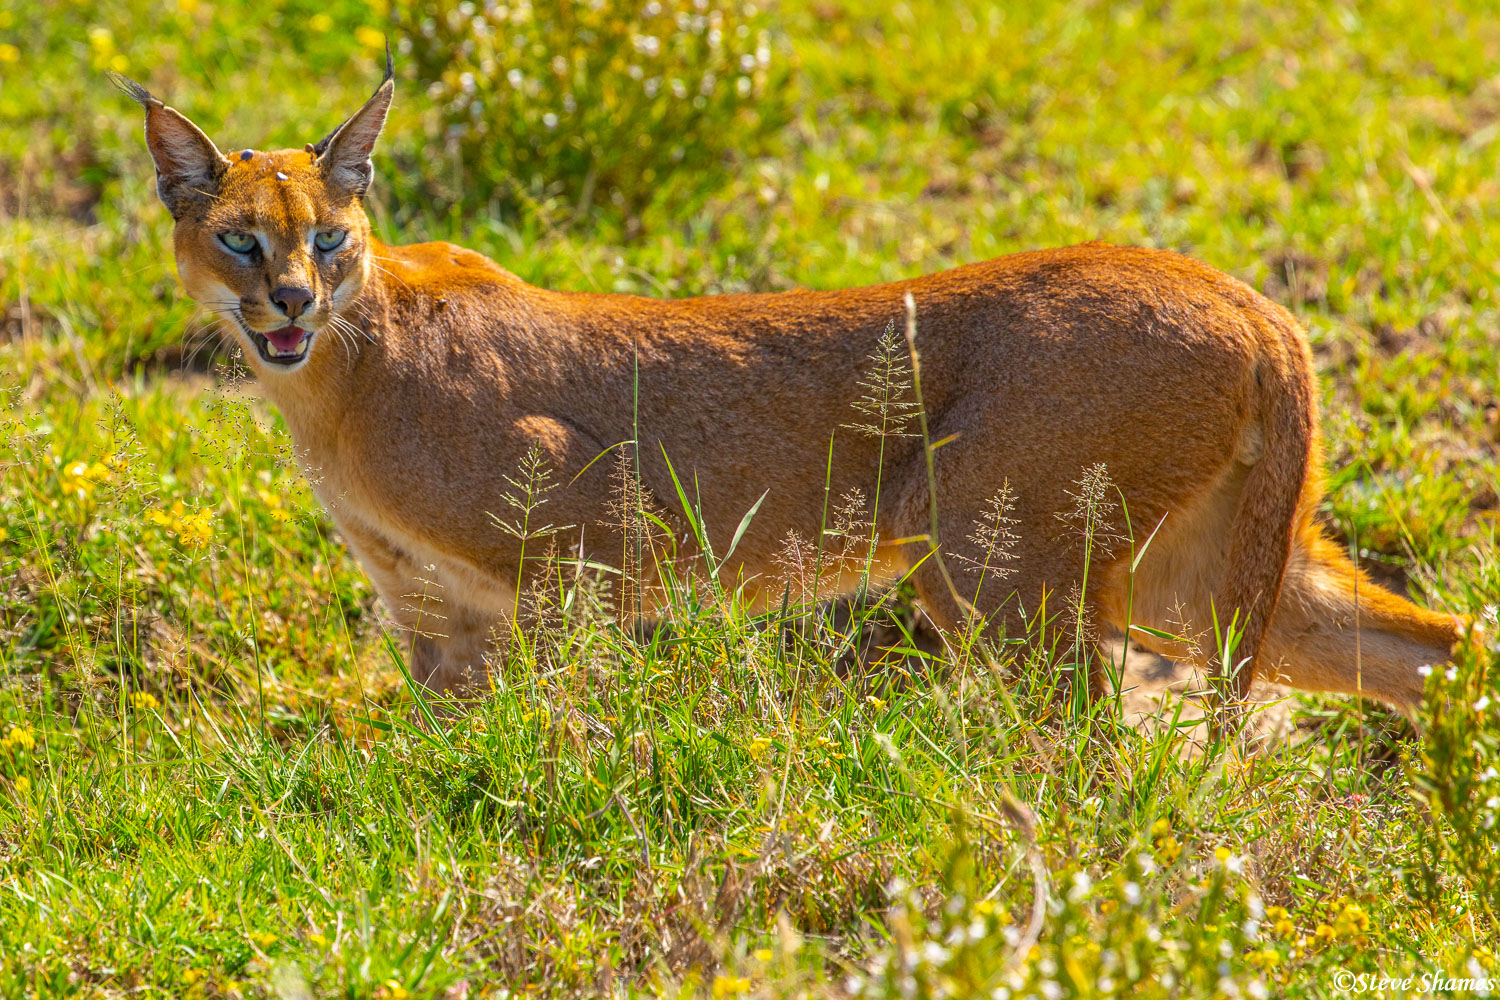 Africa's Caracal cat, looks kind of like a small mountain lion.